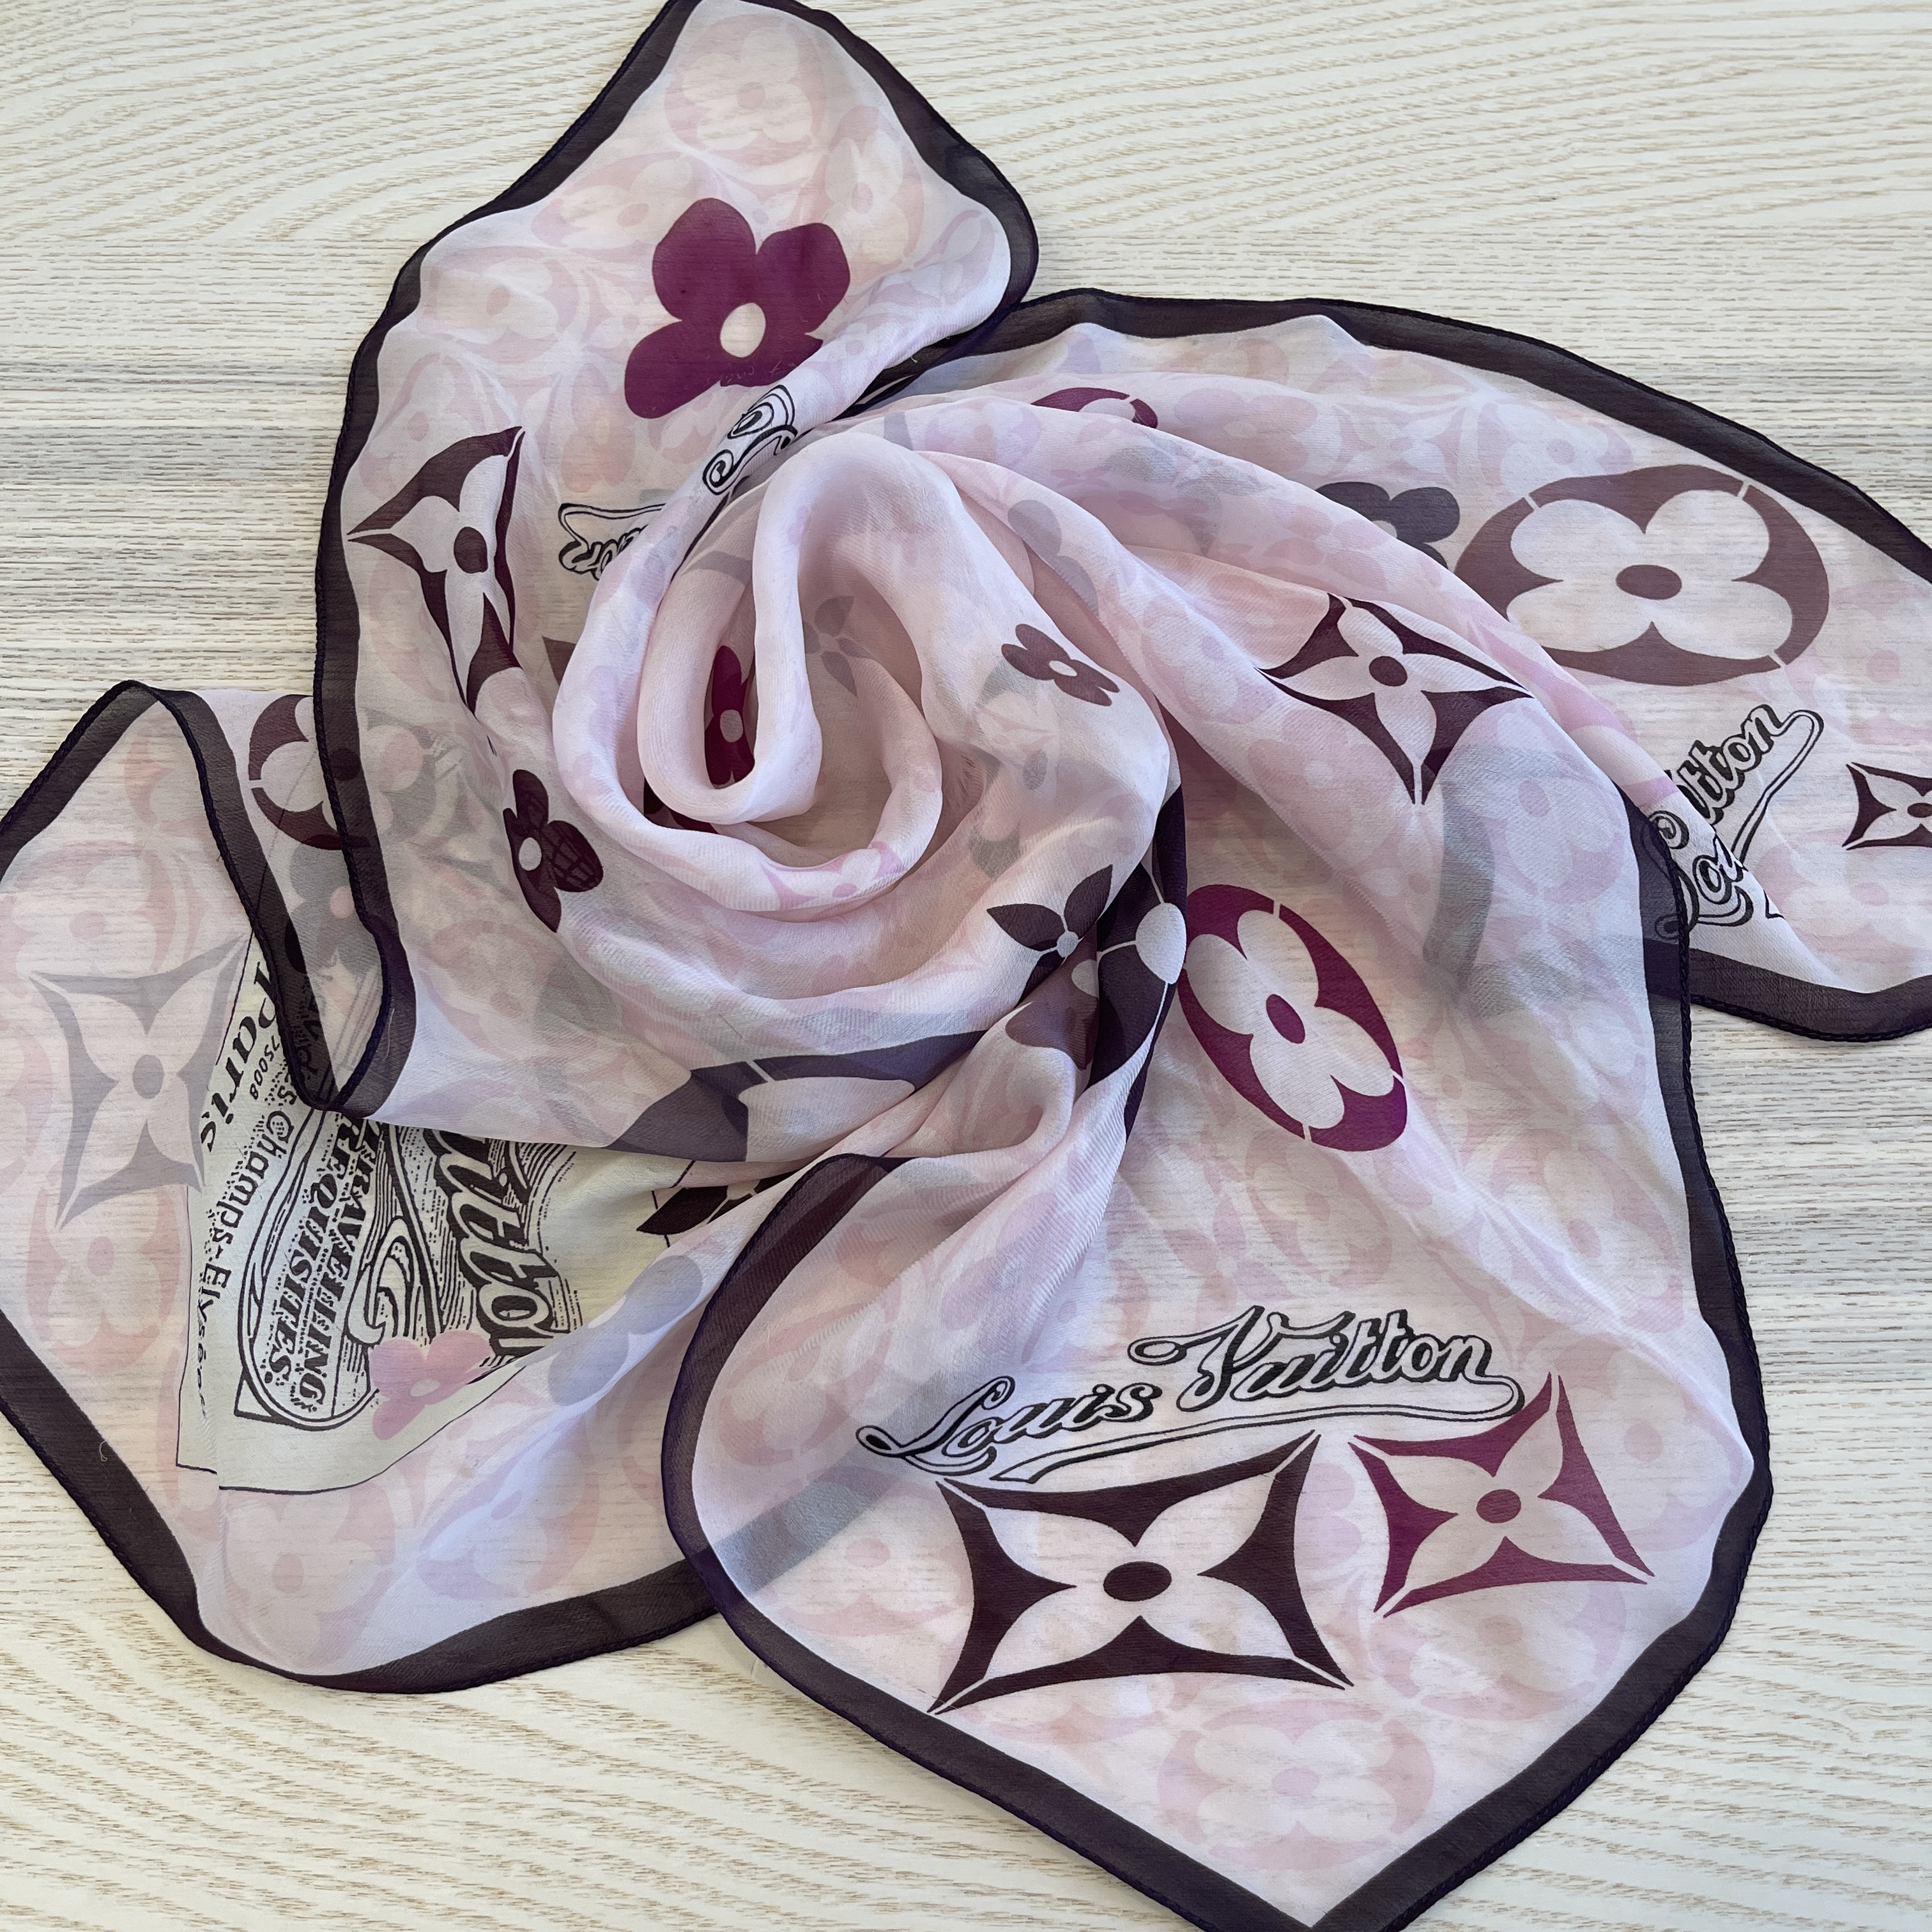 LOUIS VUITTON Authentic LOUIS VUITTON scarf flower 400505 silk Pink Used LV  400505｜Product Code：2107600824390｜BRAND OFF Online Store